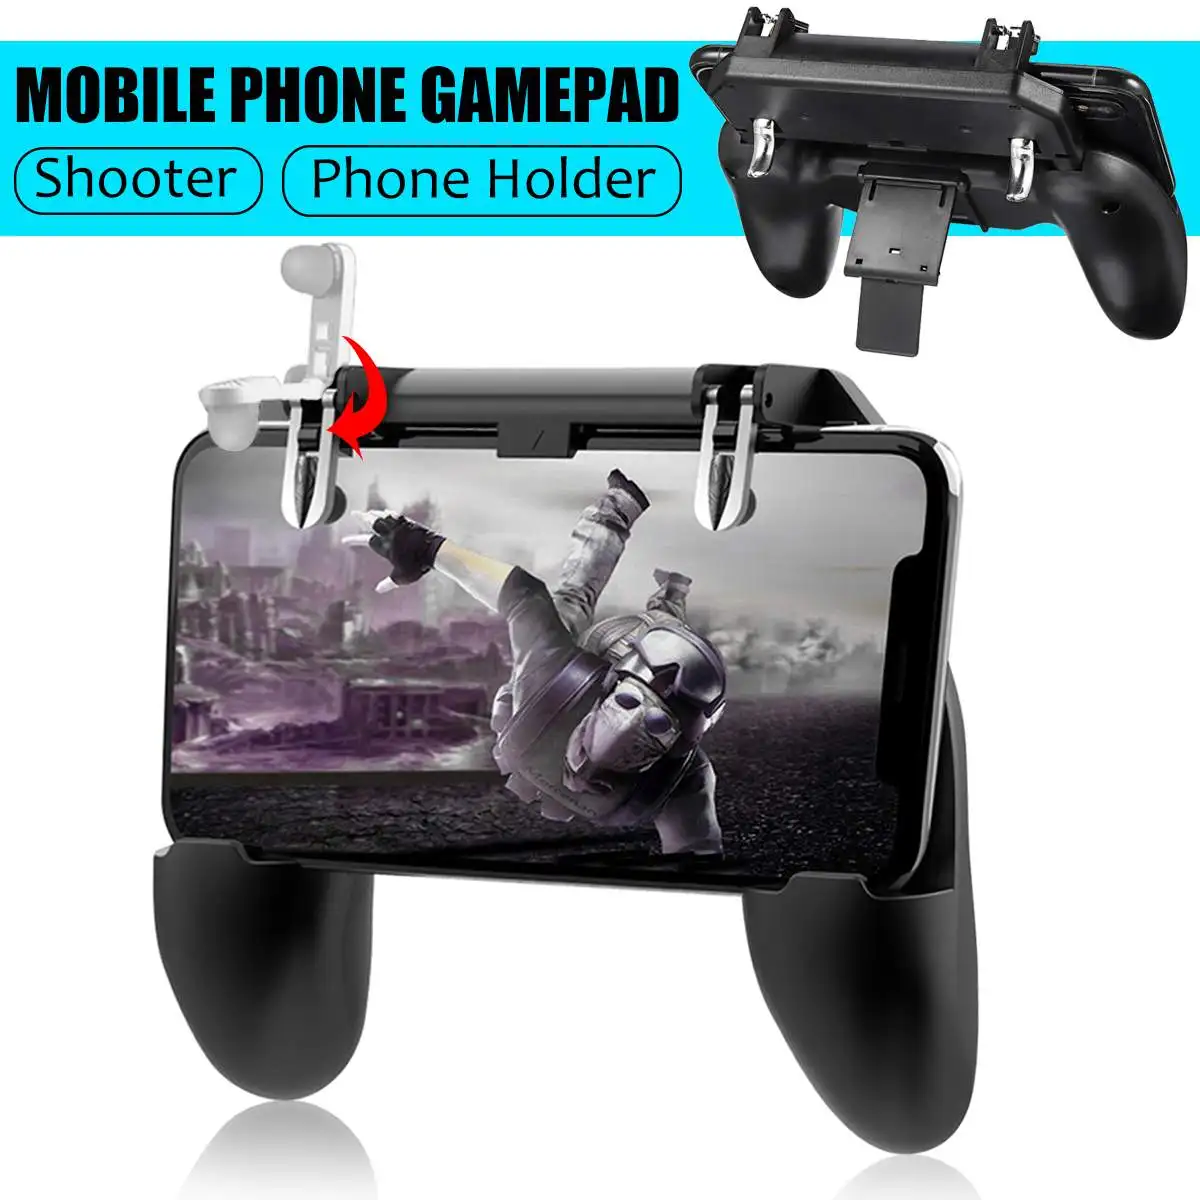 

Mobile GamePad Joystick For PUBG Cooler Fan L1 R1 Shooter Controller Handle Smartphone Trigger with 2000/4000mAh Power Bank